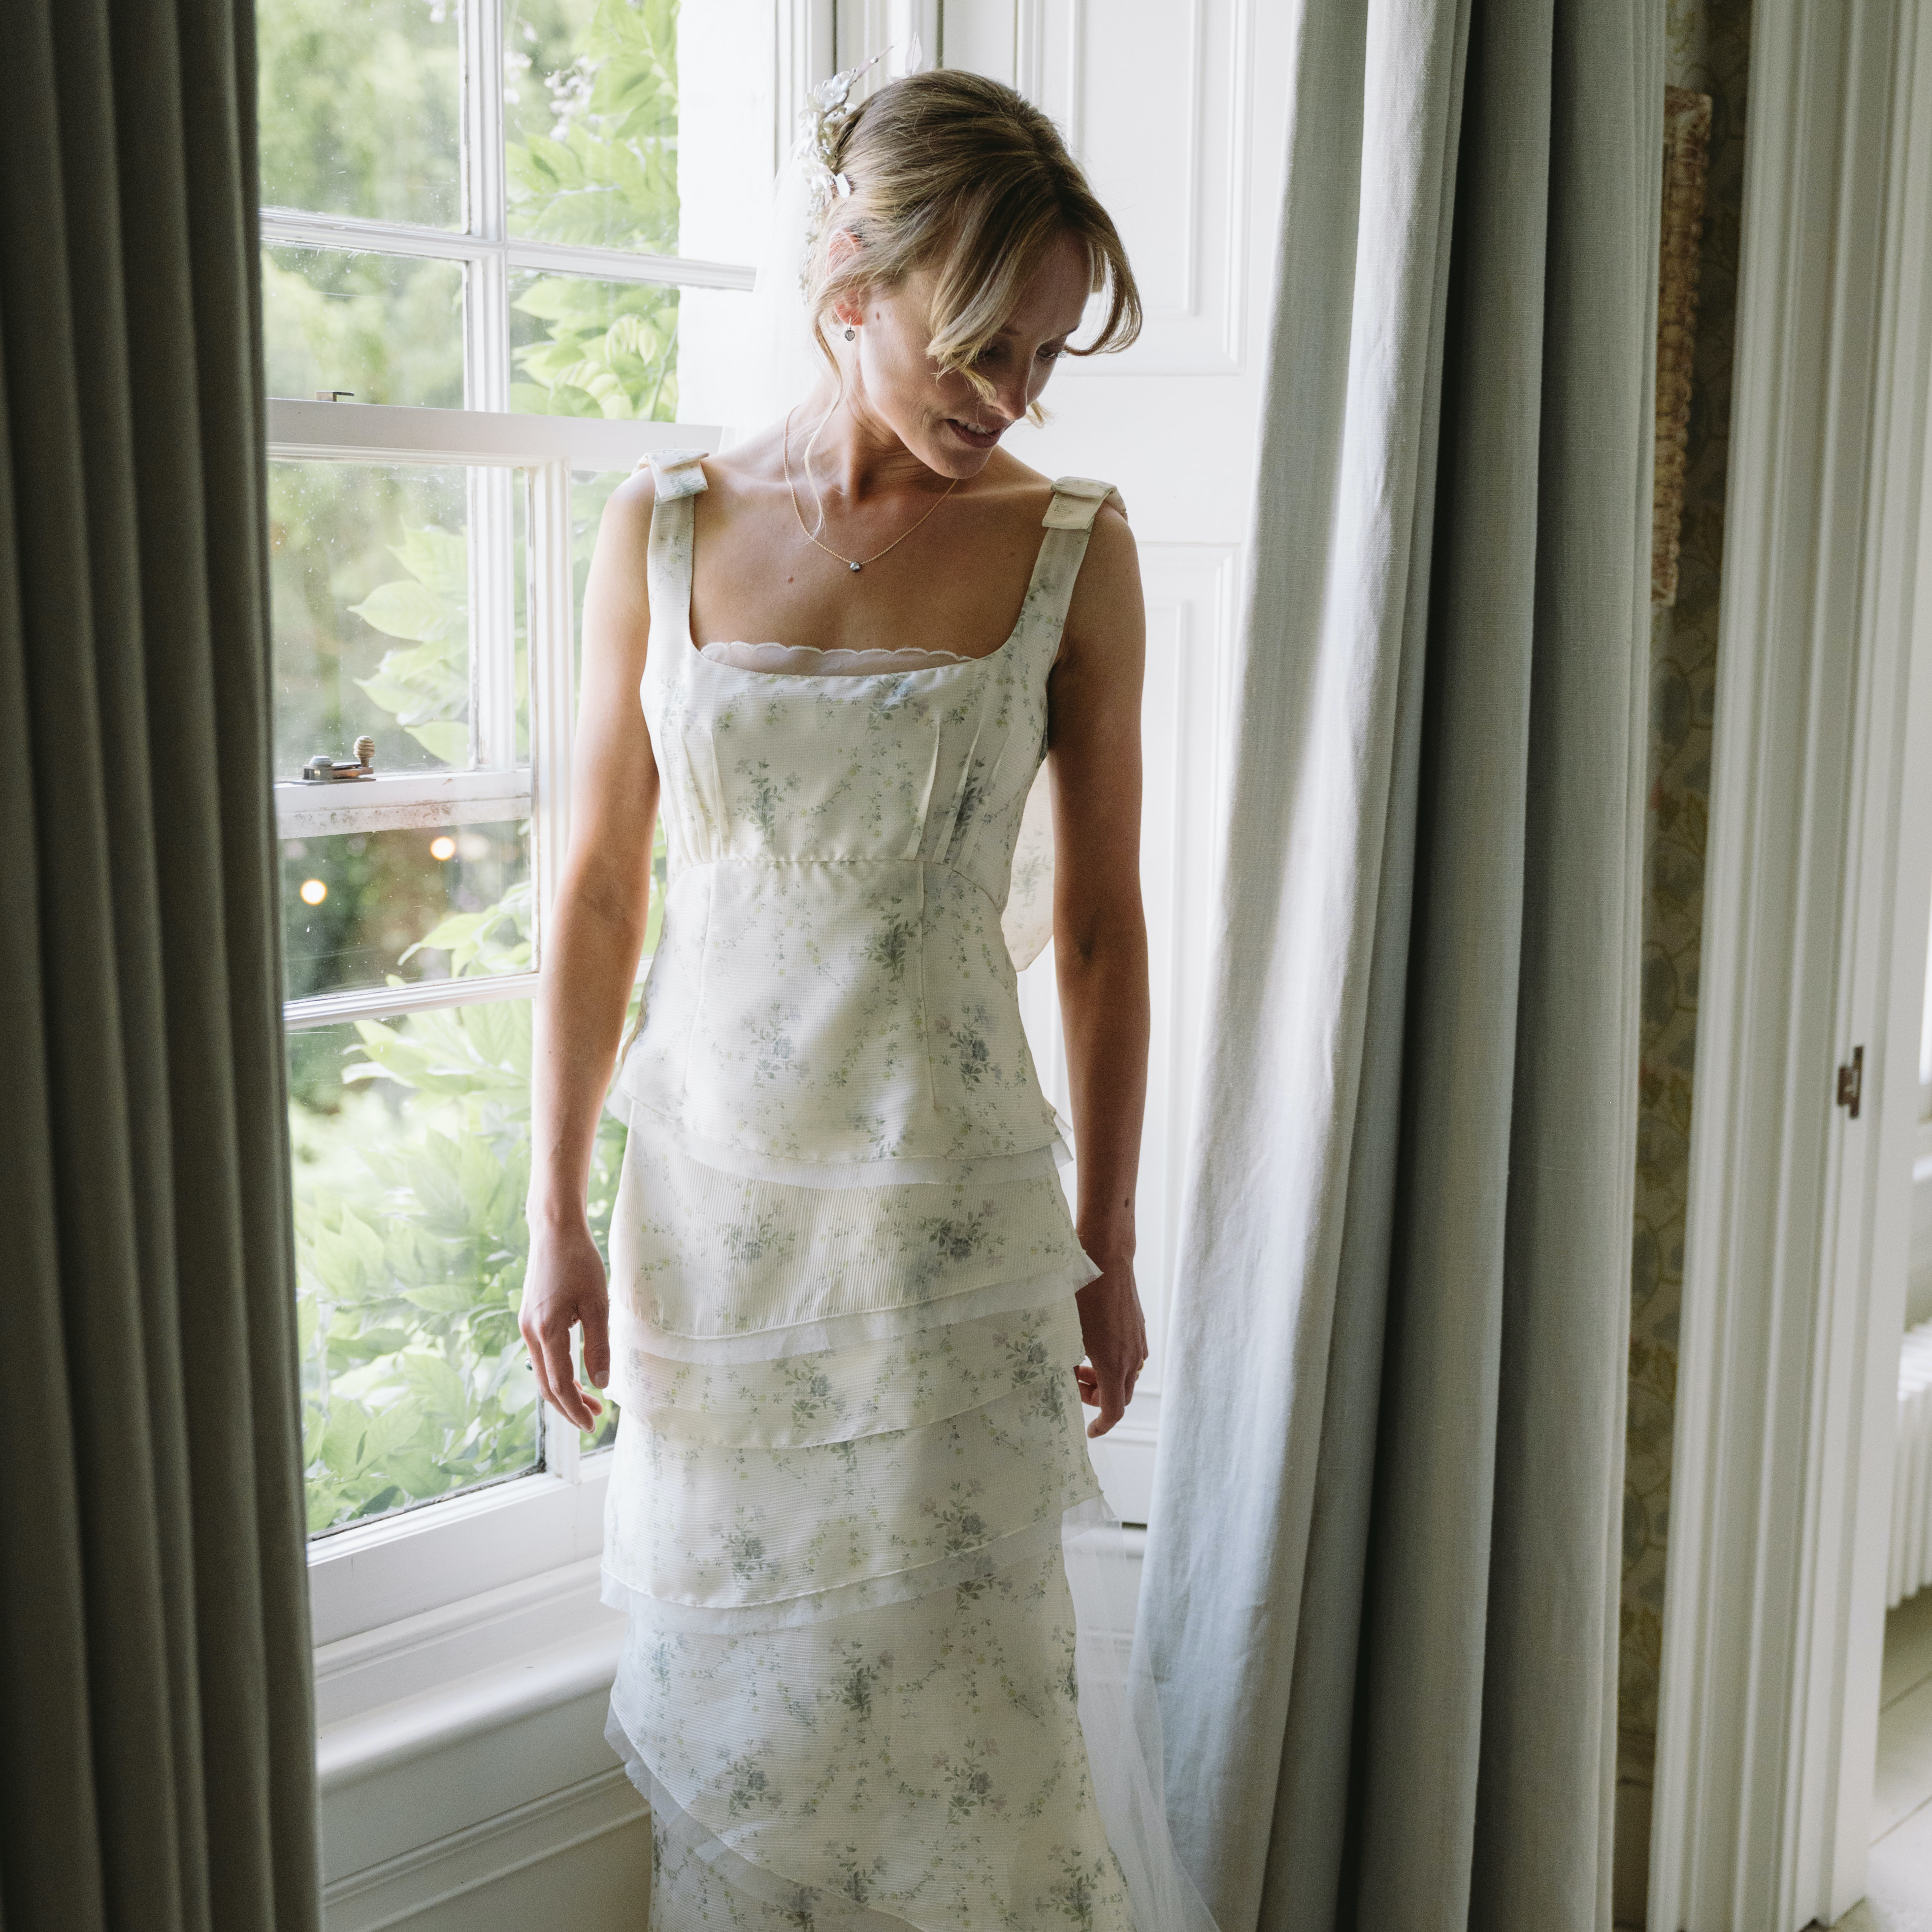 Considering a Pre-Loved Wedding Dress? This Is Everything You Need to Know, According to Experts